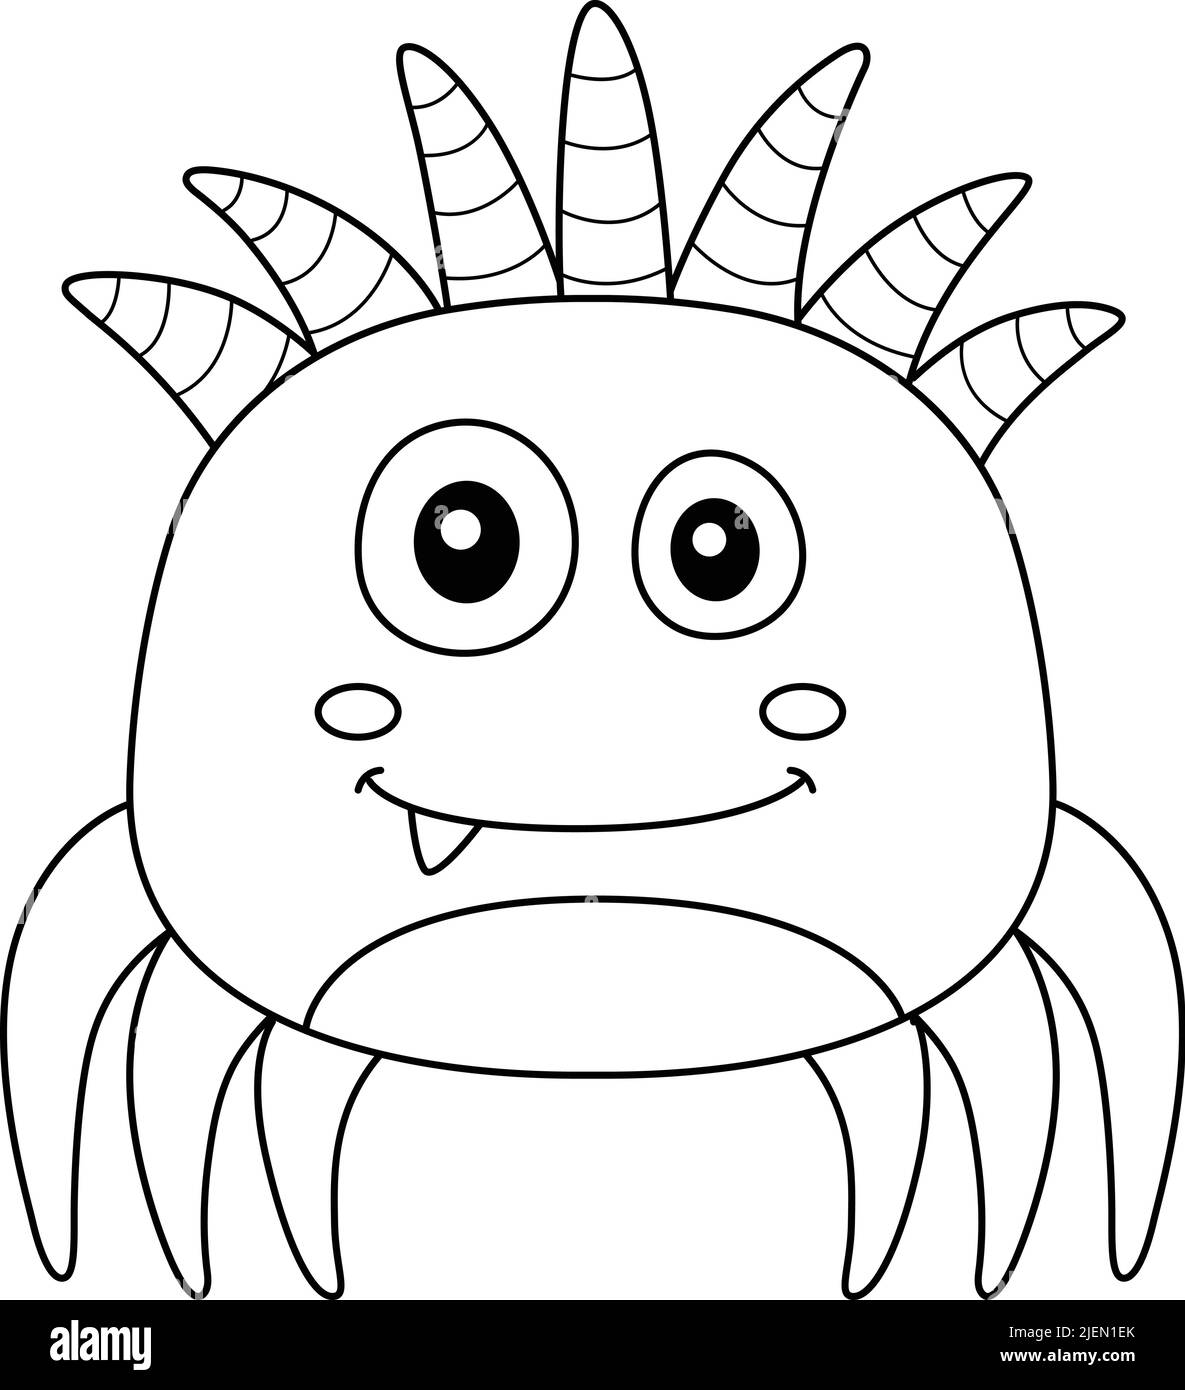 25 Easy Spider Drawing Ideas  How to Draw a Spider